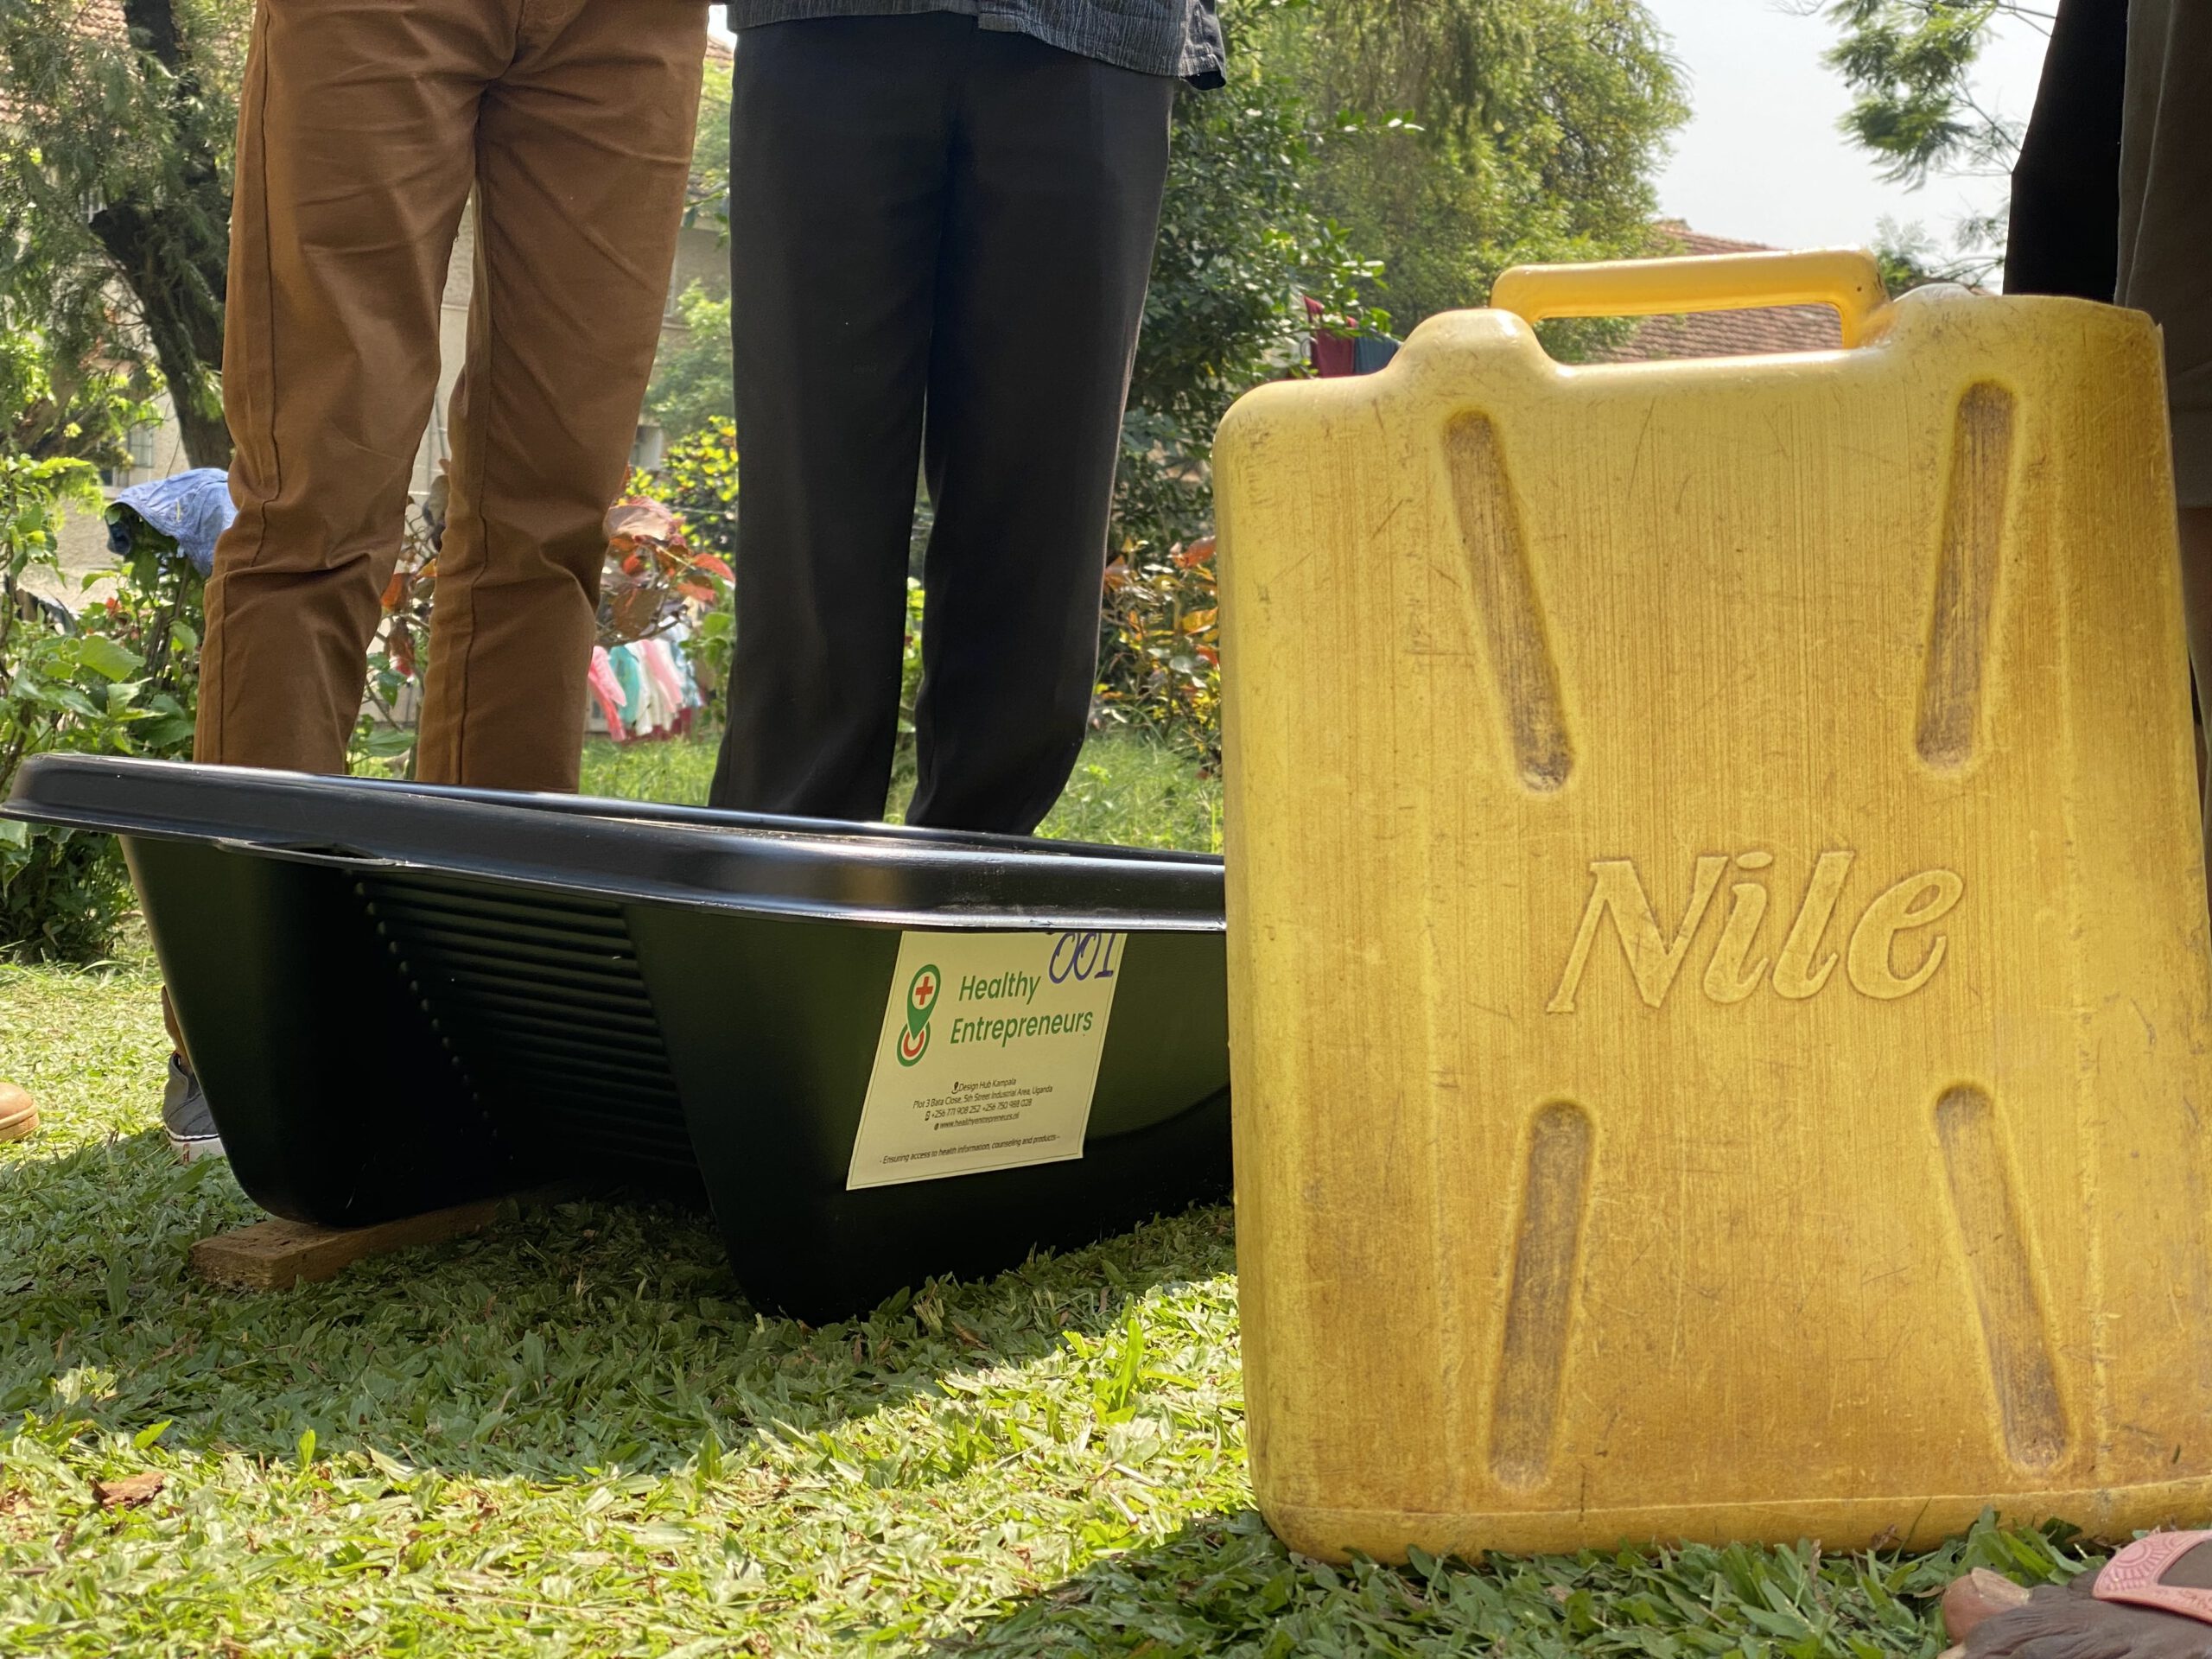 The first batch of Solar Soakers was produced in the Netherlands and have been shipped to Uganda and Kenya